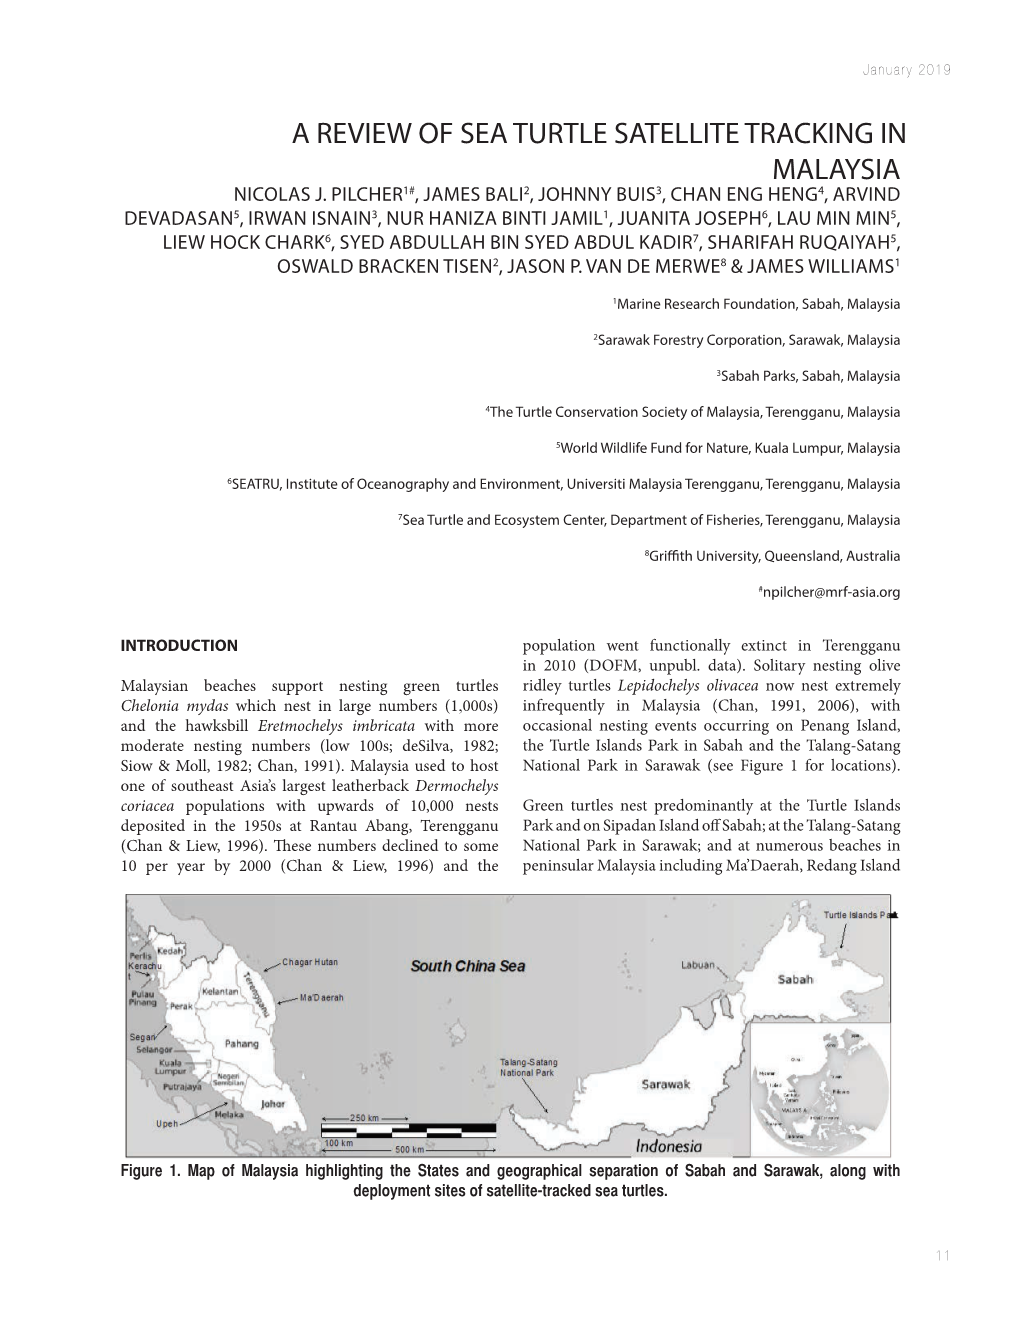 A Review of Sea Turtle Satellite Tracking in Malaysia Nicolas J